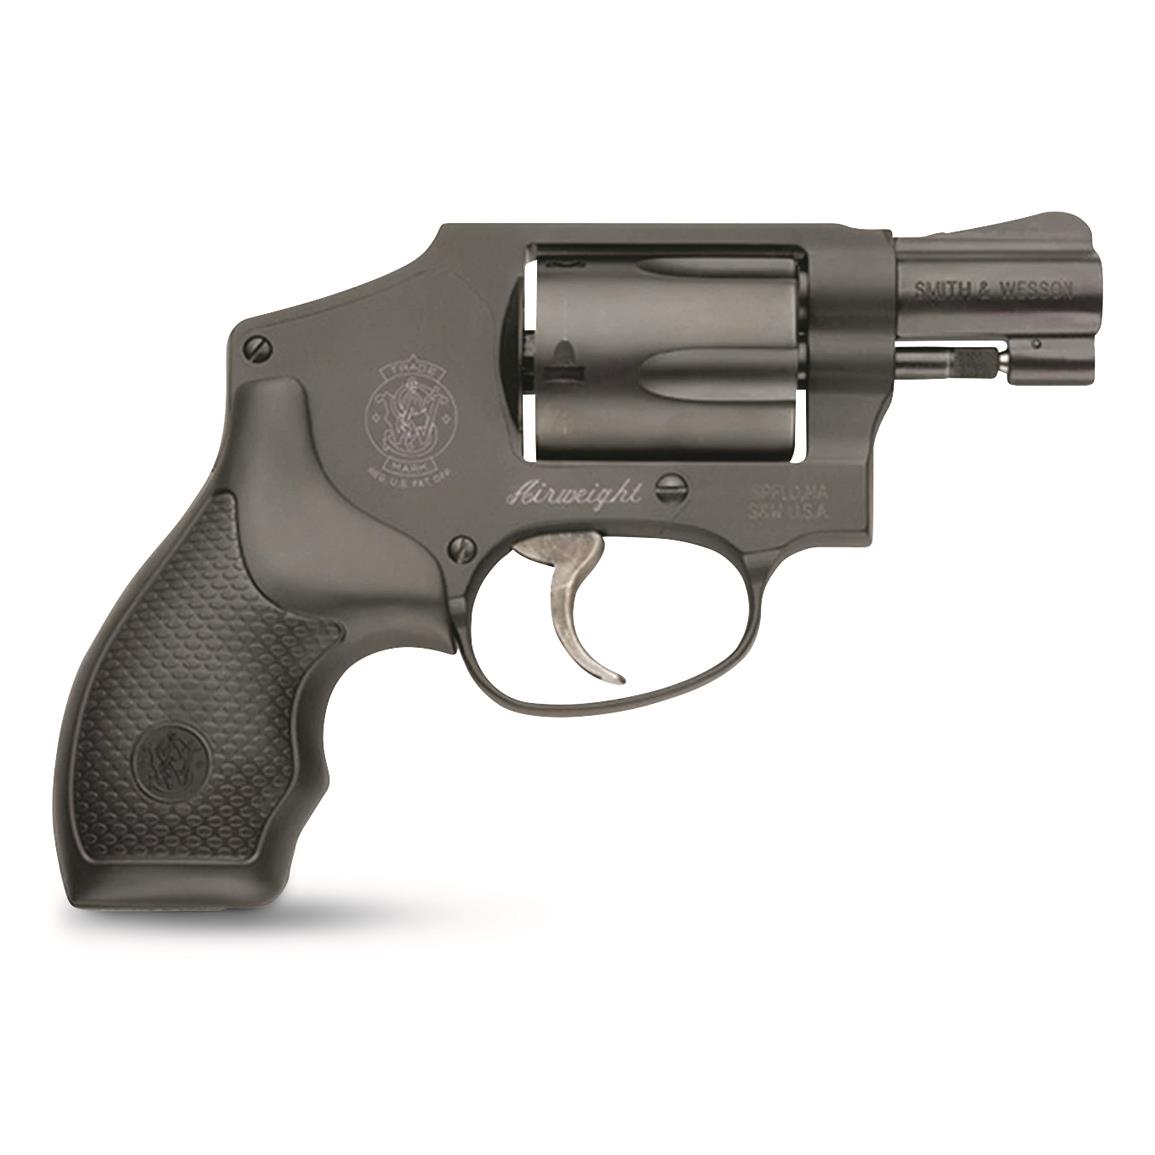 Smith & Wesson Model 442 Airweight, Revolver, .38 Special, 1.875" Barrel, 5 Rounds